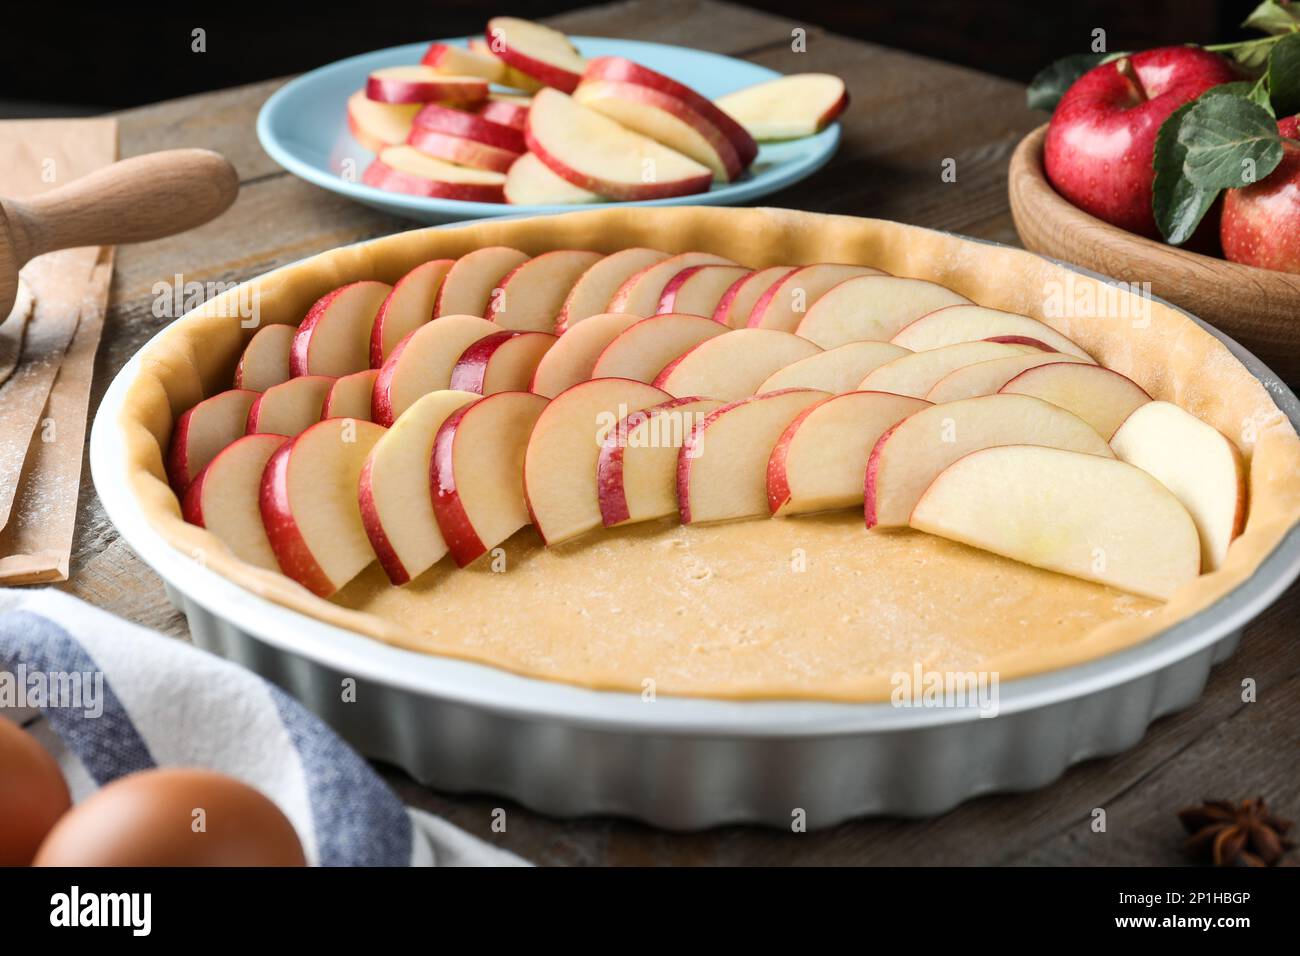 Dish with fresh apple slices and raw dough on wooden table. Baking pie Stock Photo